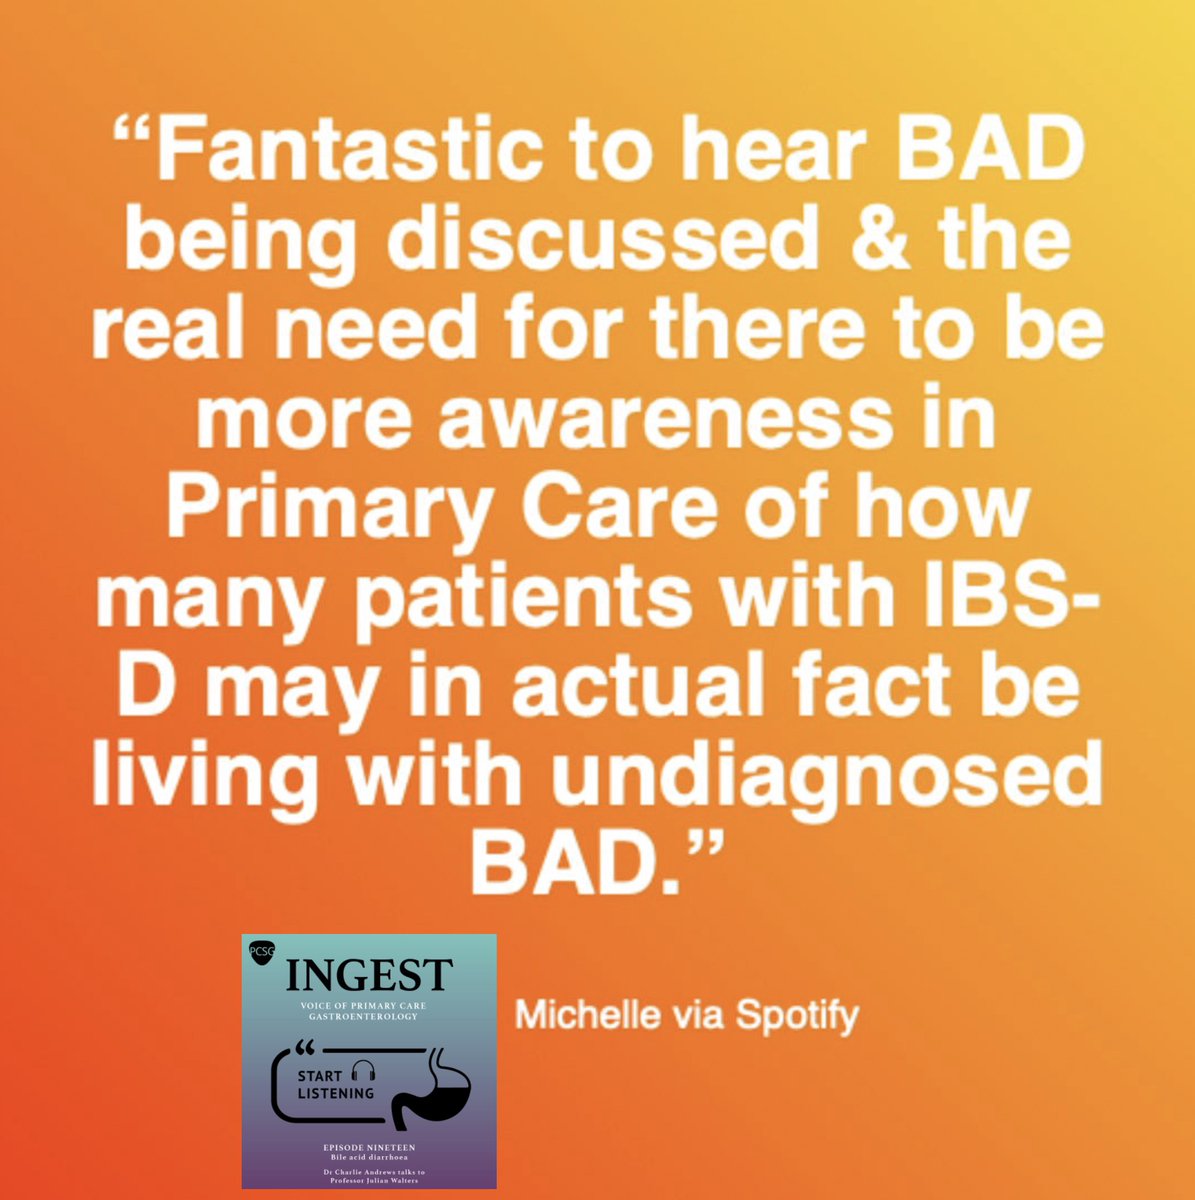 Are you a BAD listener like Michelle? Ingest, the PCSG podcast for Primary Care available on Spotify and all good podcast platforms. Subscribe via pcsg.org.uk/ingest/